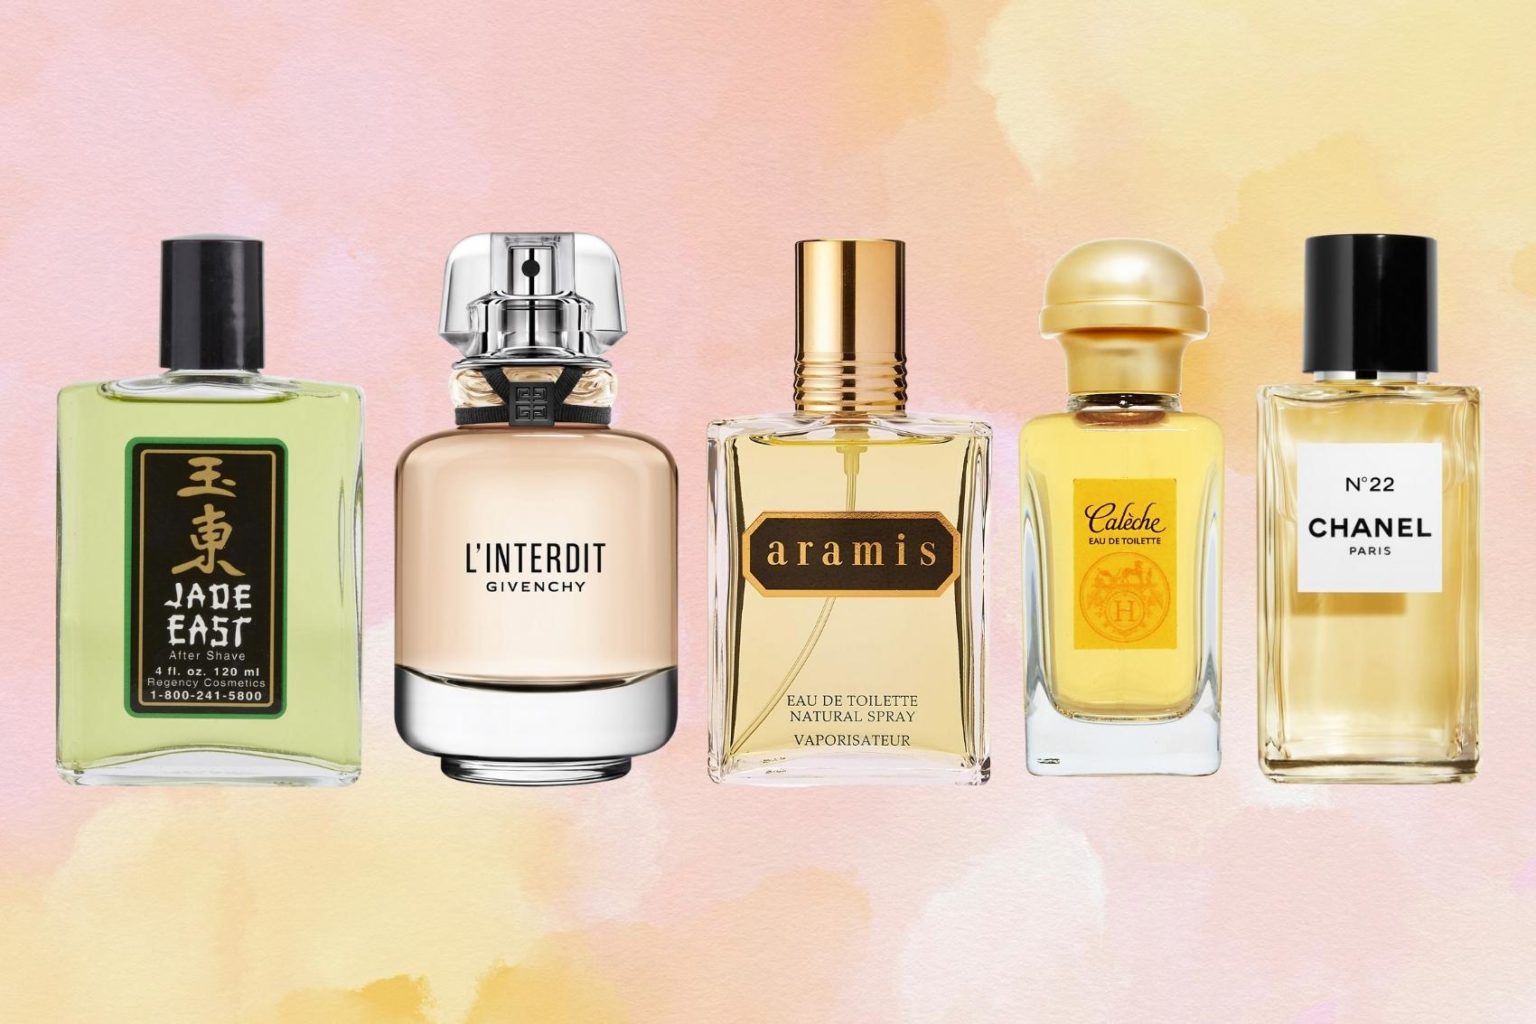 Popular Old Perfumes & Colognes From The 60s - FragranceReview.com